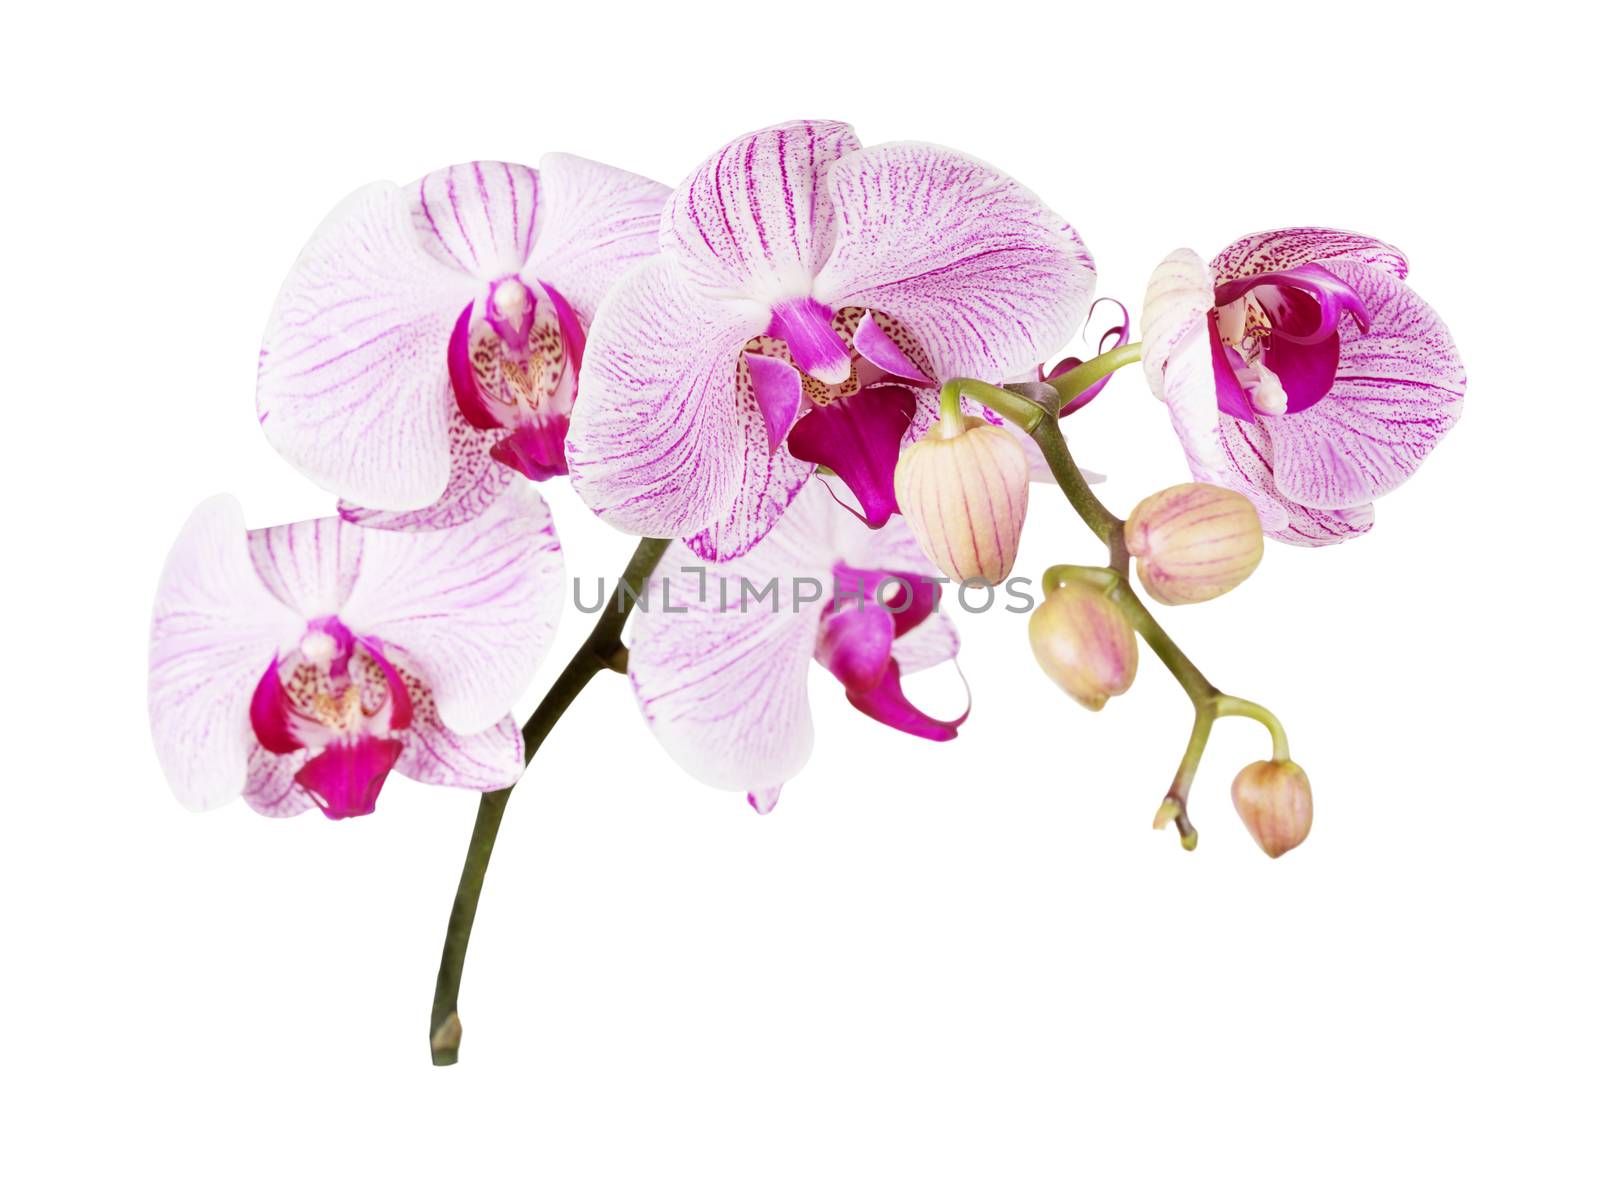 Pink orchid on a white background by Epitavi